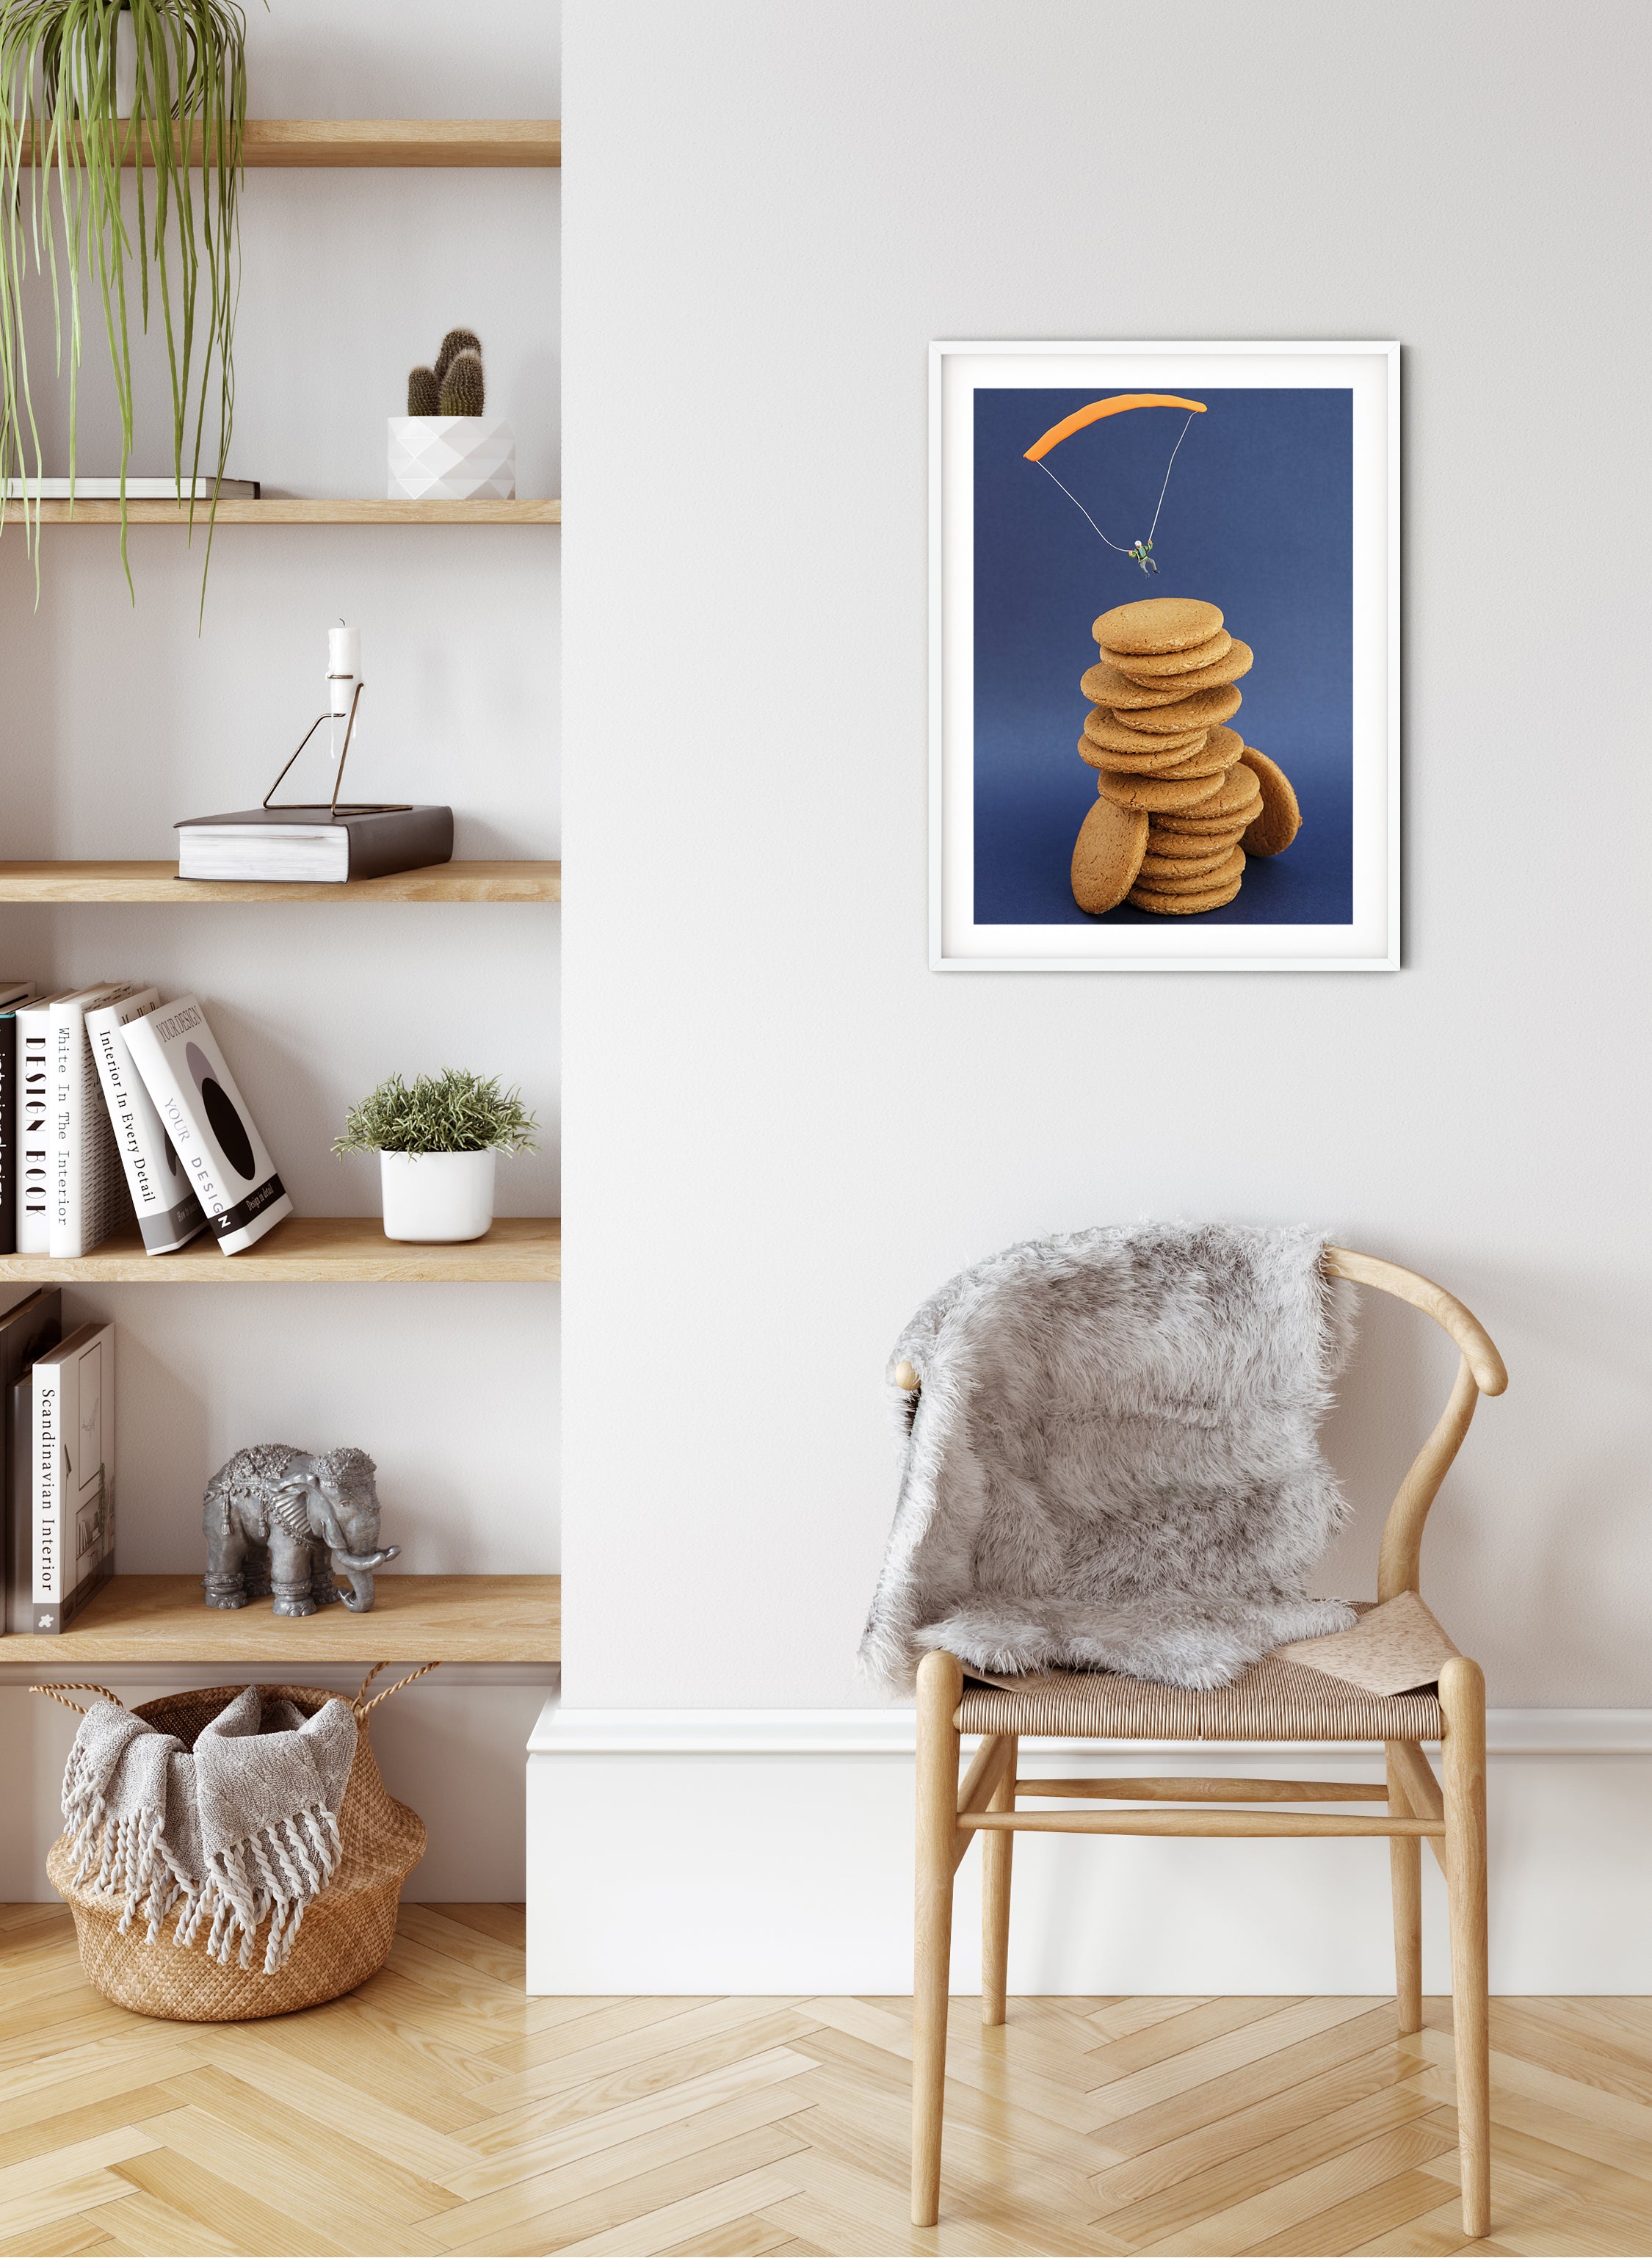 Ginger Nuts - Photographic Print